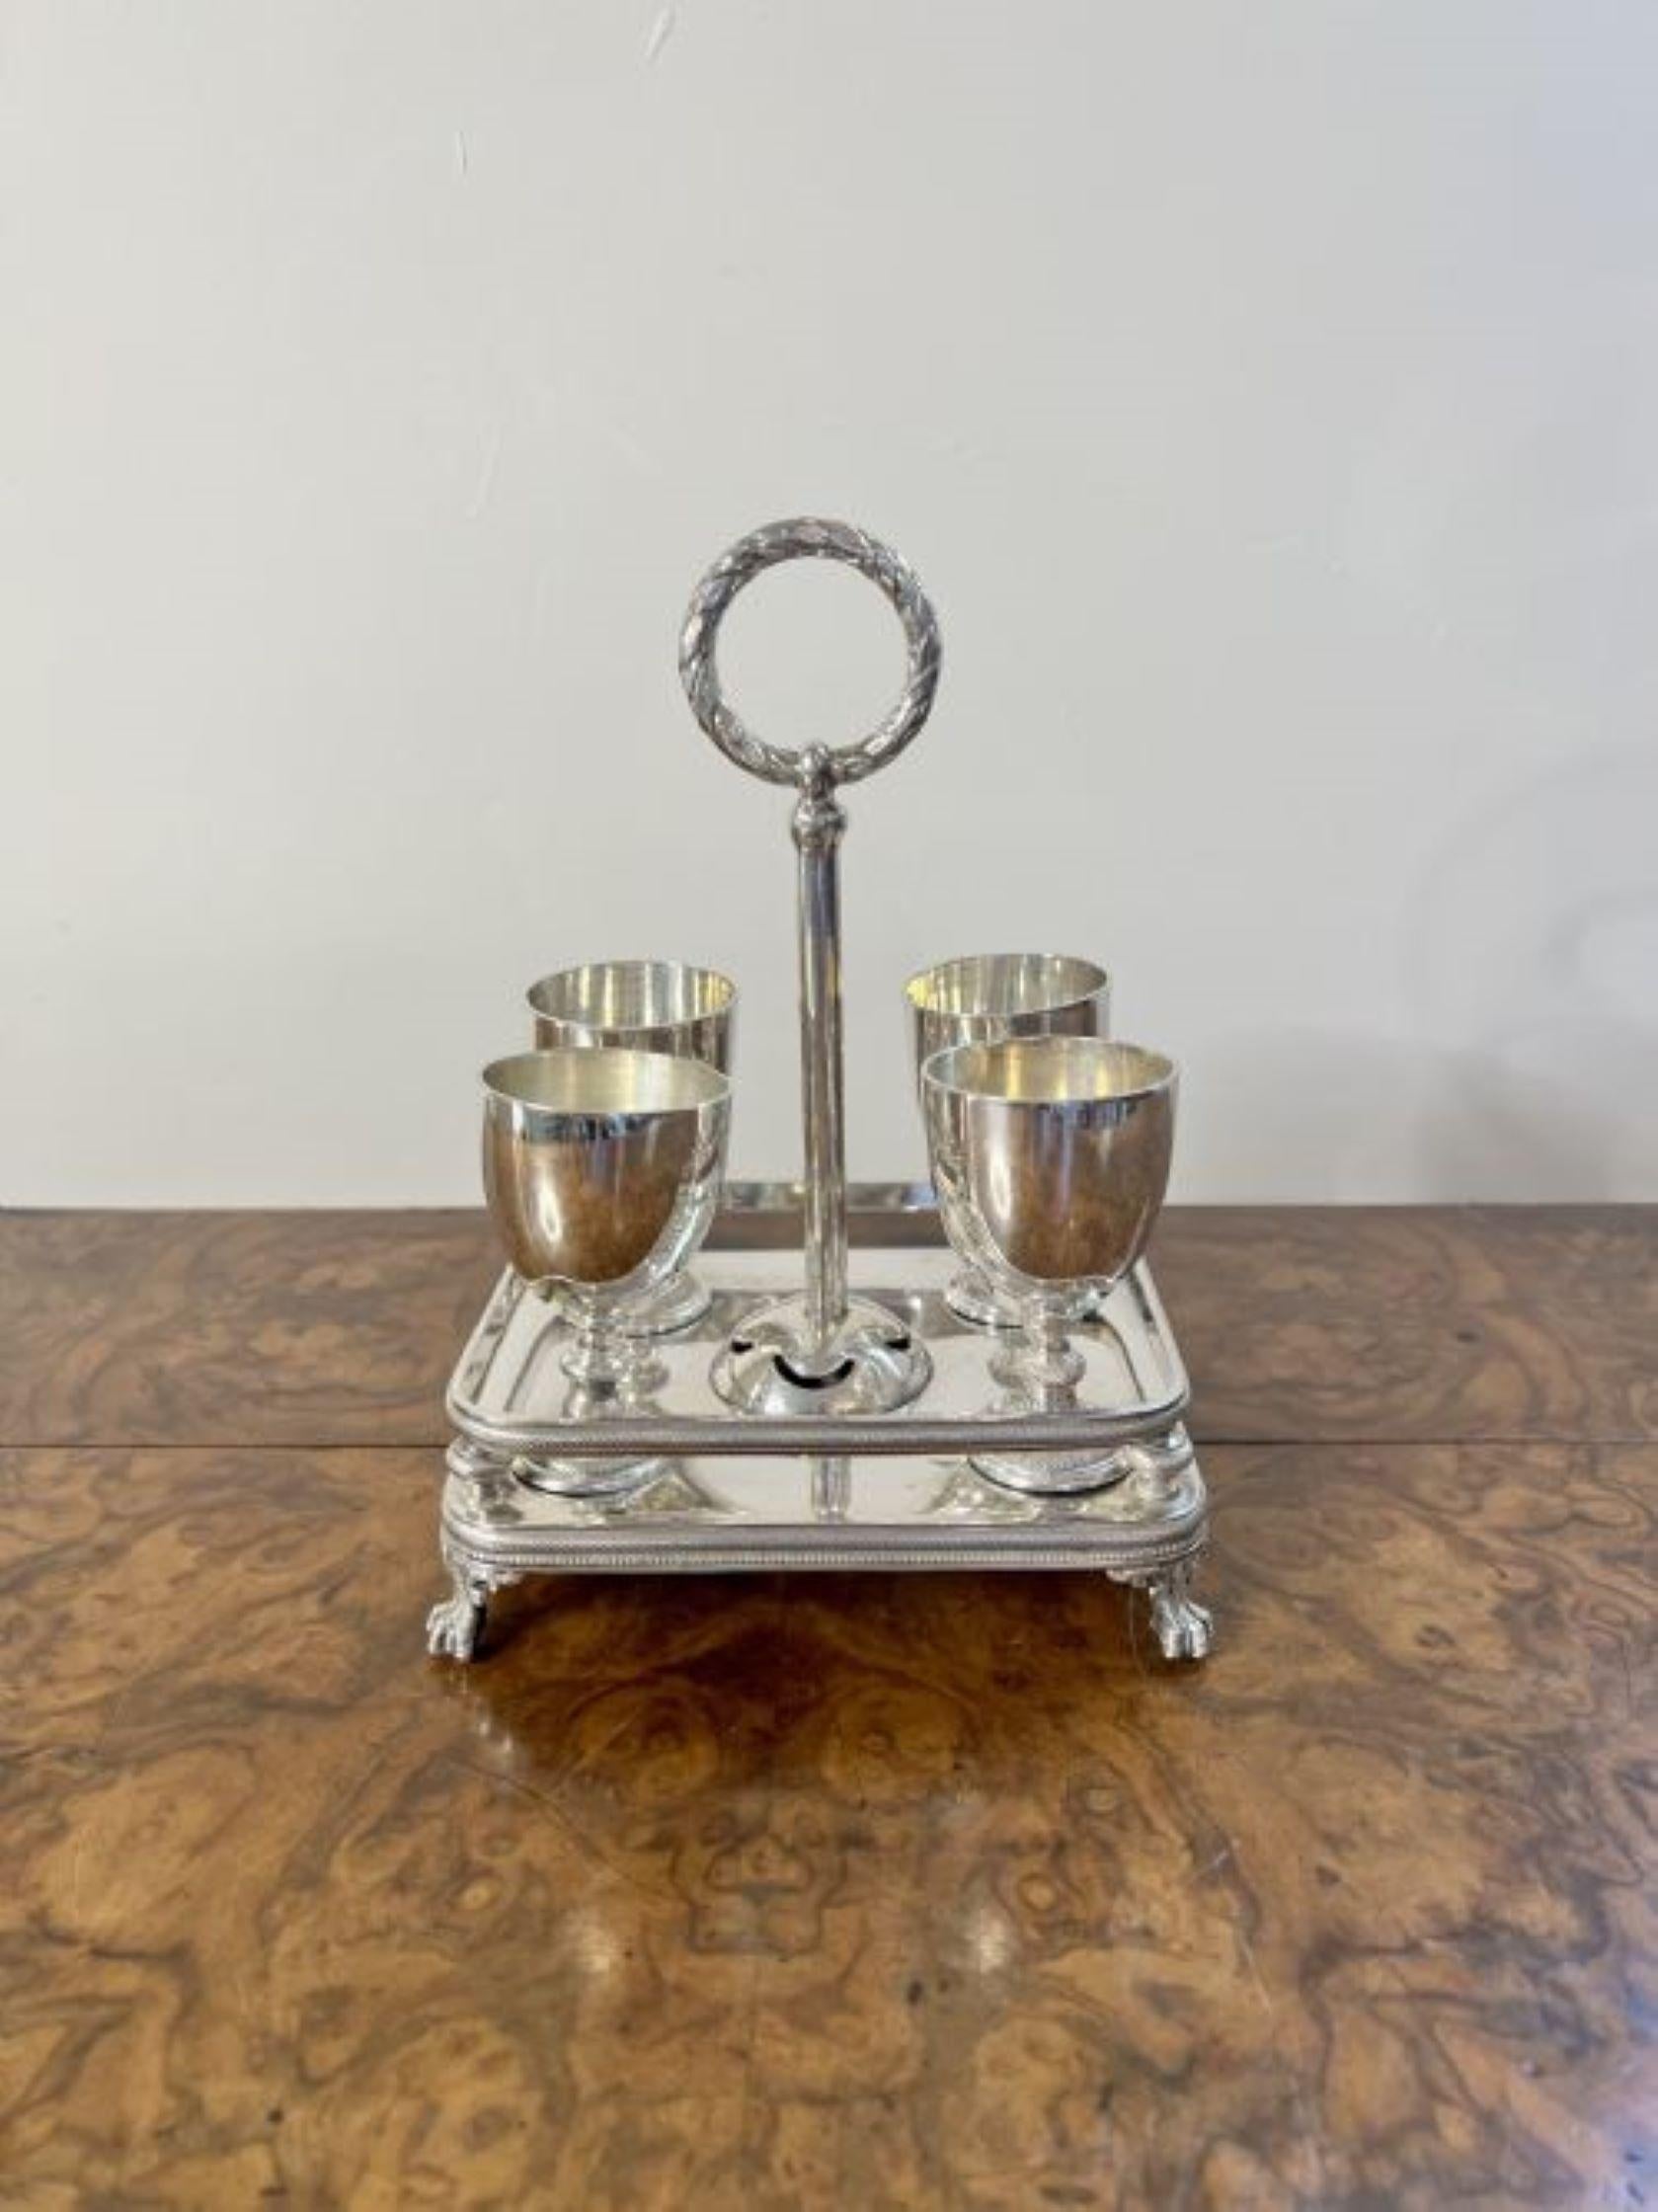 Fantastic quality antique Edwardian silver plated egg cruet set having a fantastic quality antique Edwardian egg cruet set with a quality silver plated stand, an ornate circular handle to the centre, four silver plated egg cups and four silver